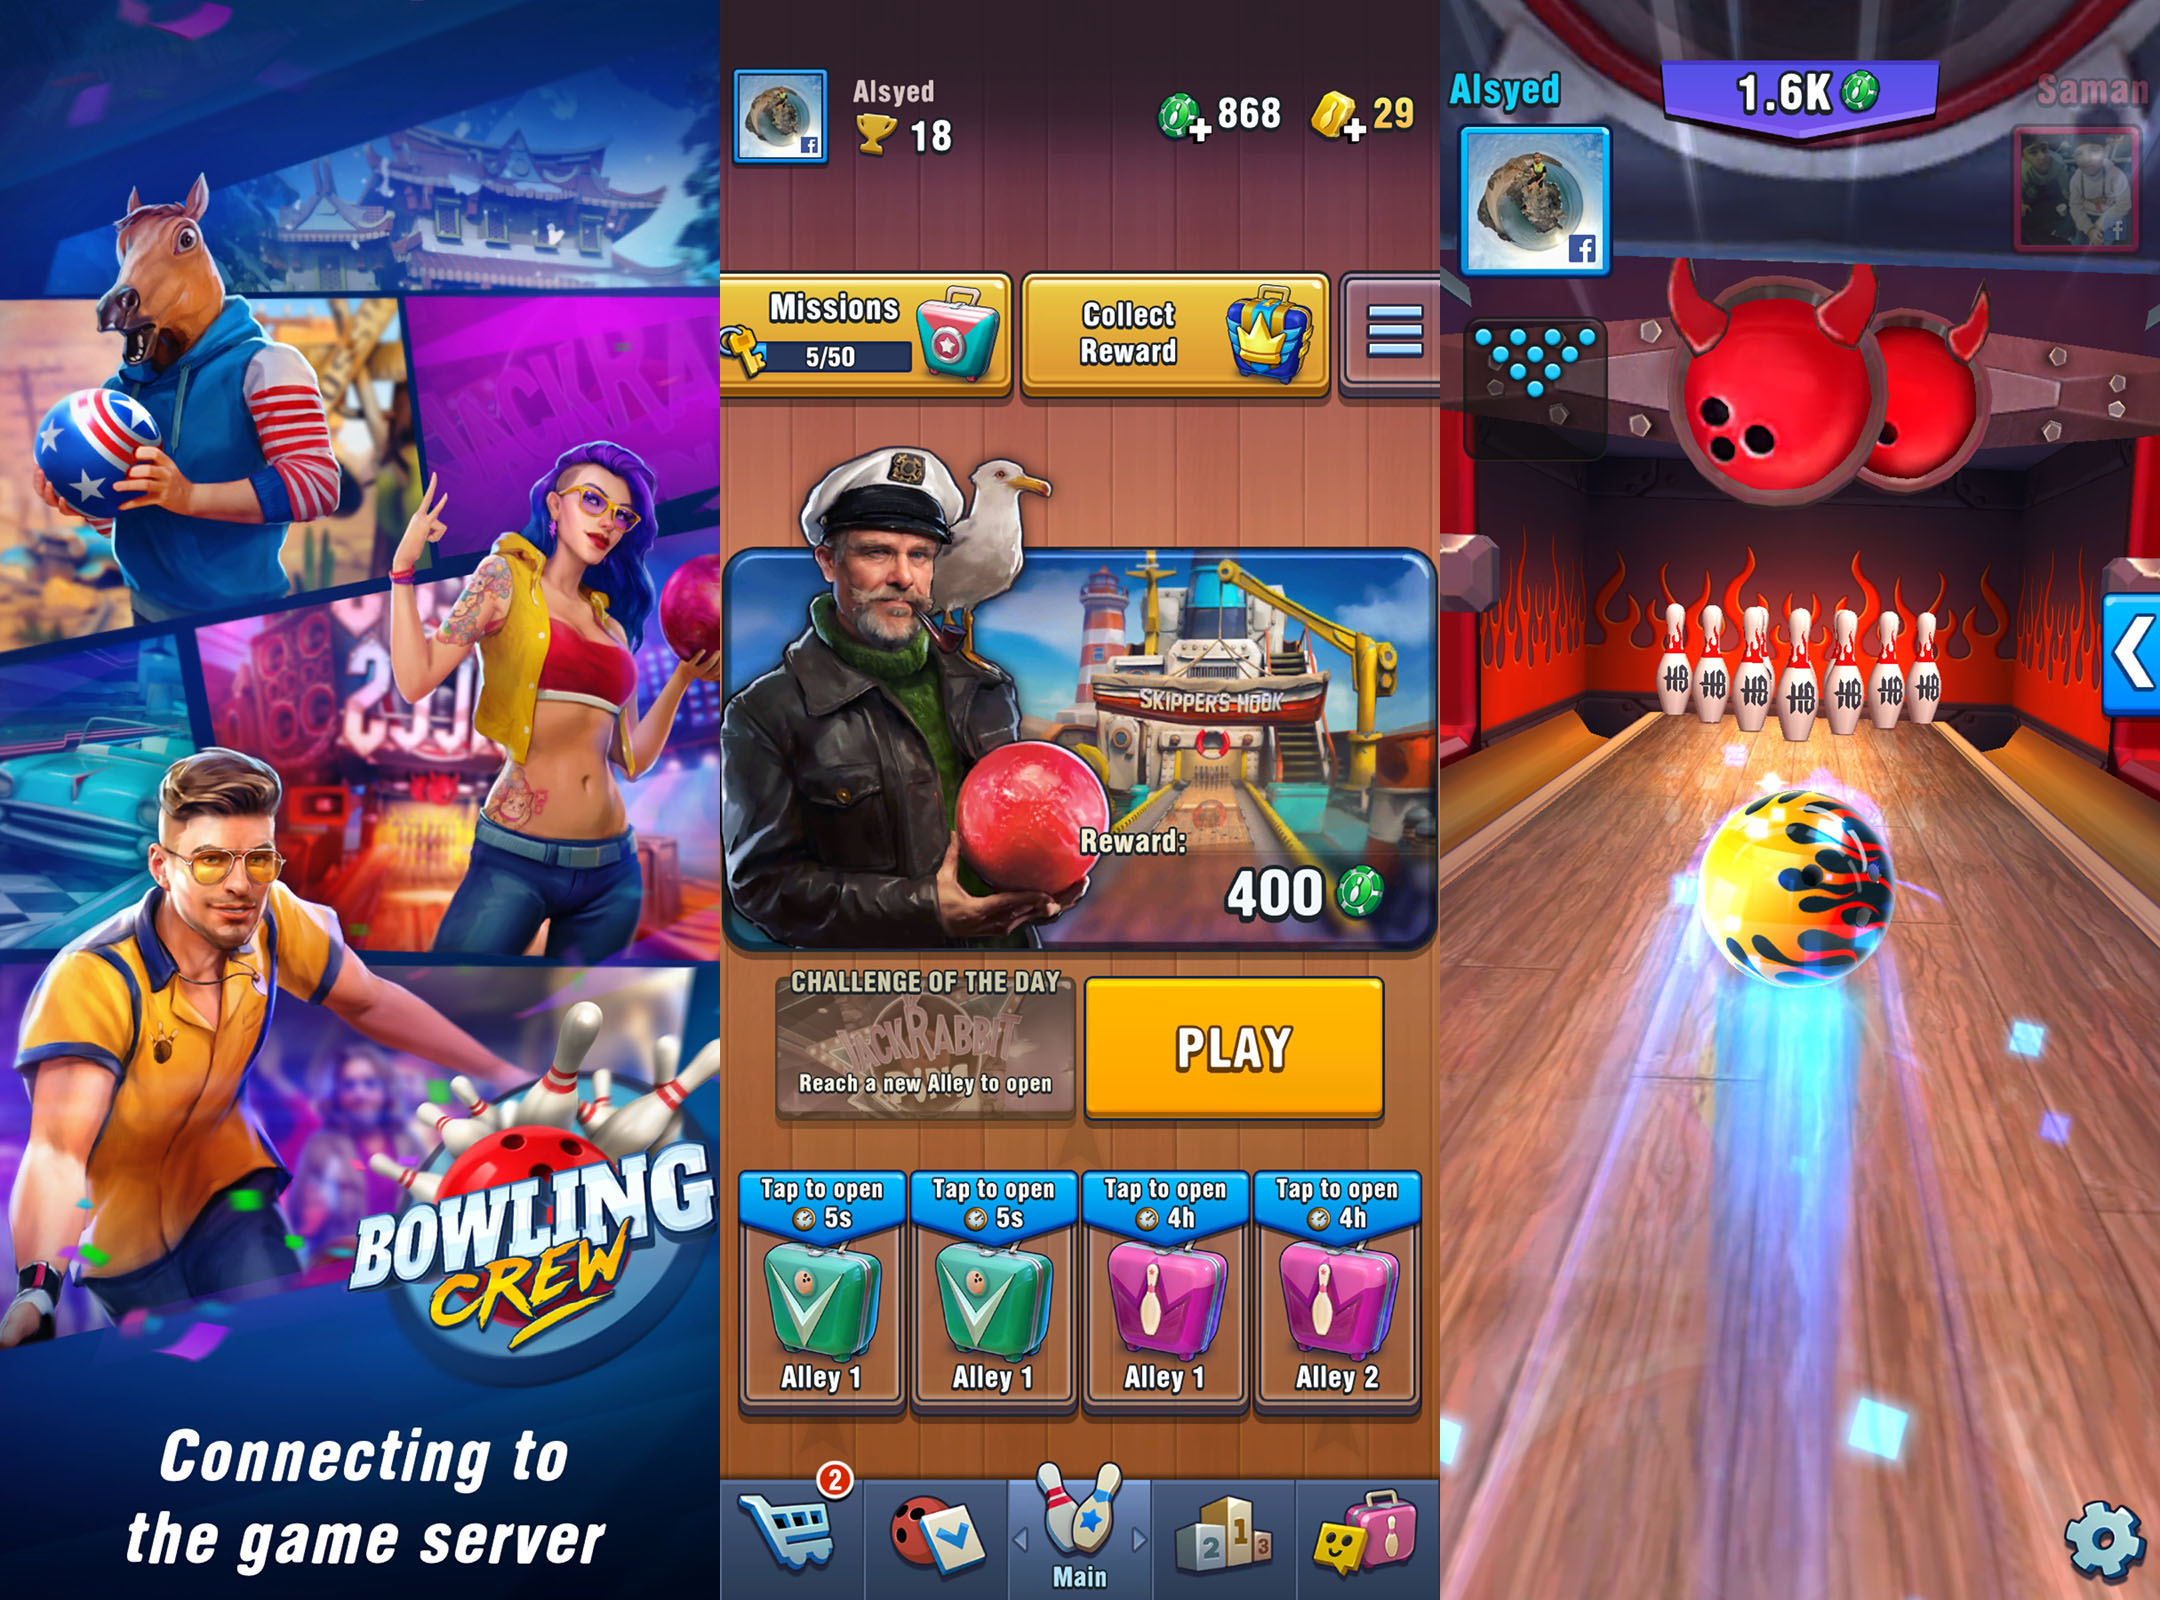 Bowling Crew: See How to Win Matches, Collect Tokens, and More